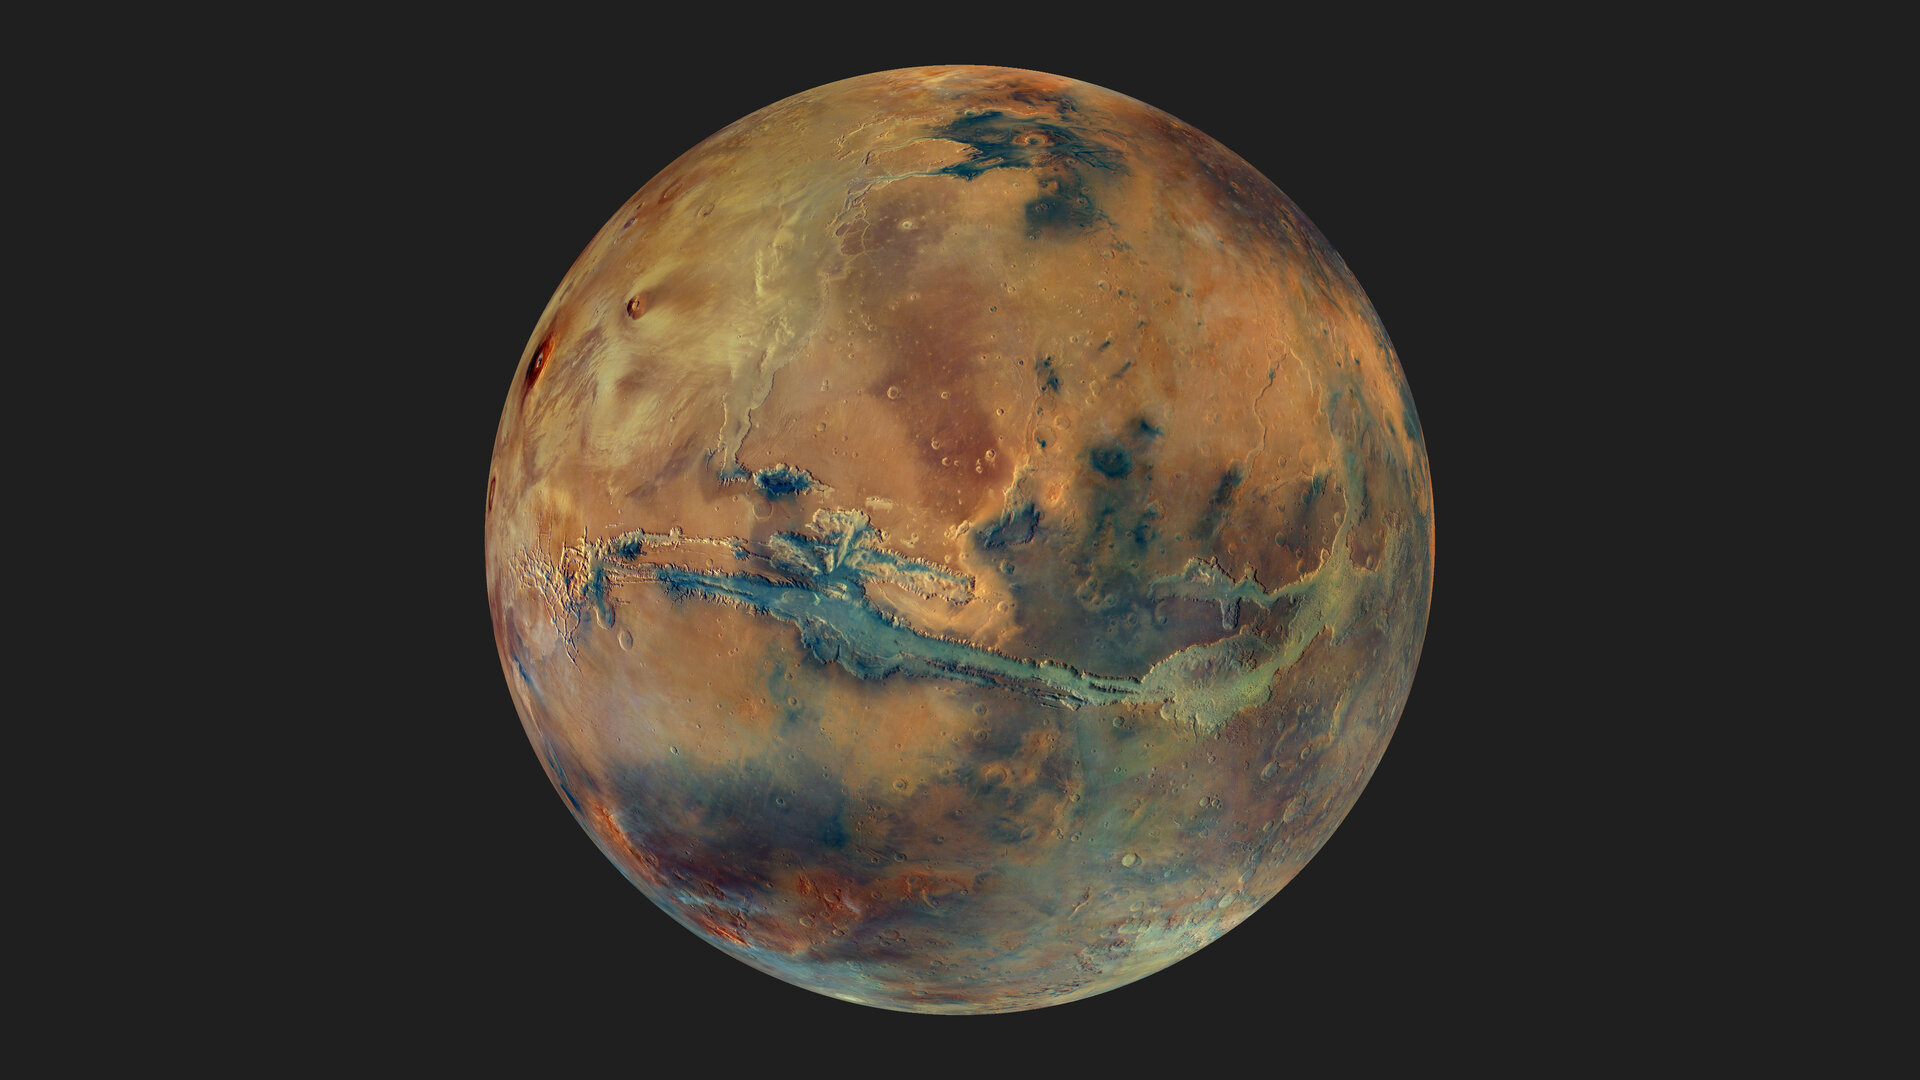 Mars as never seen before: Check out this spectacular new view of the Red Planet 